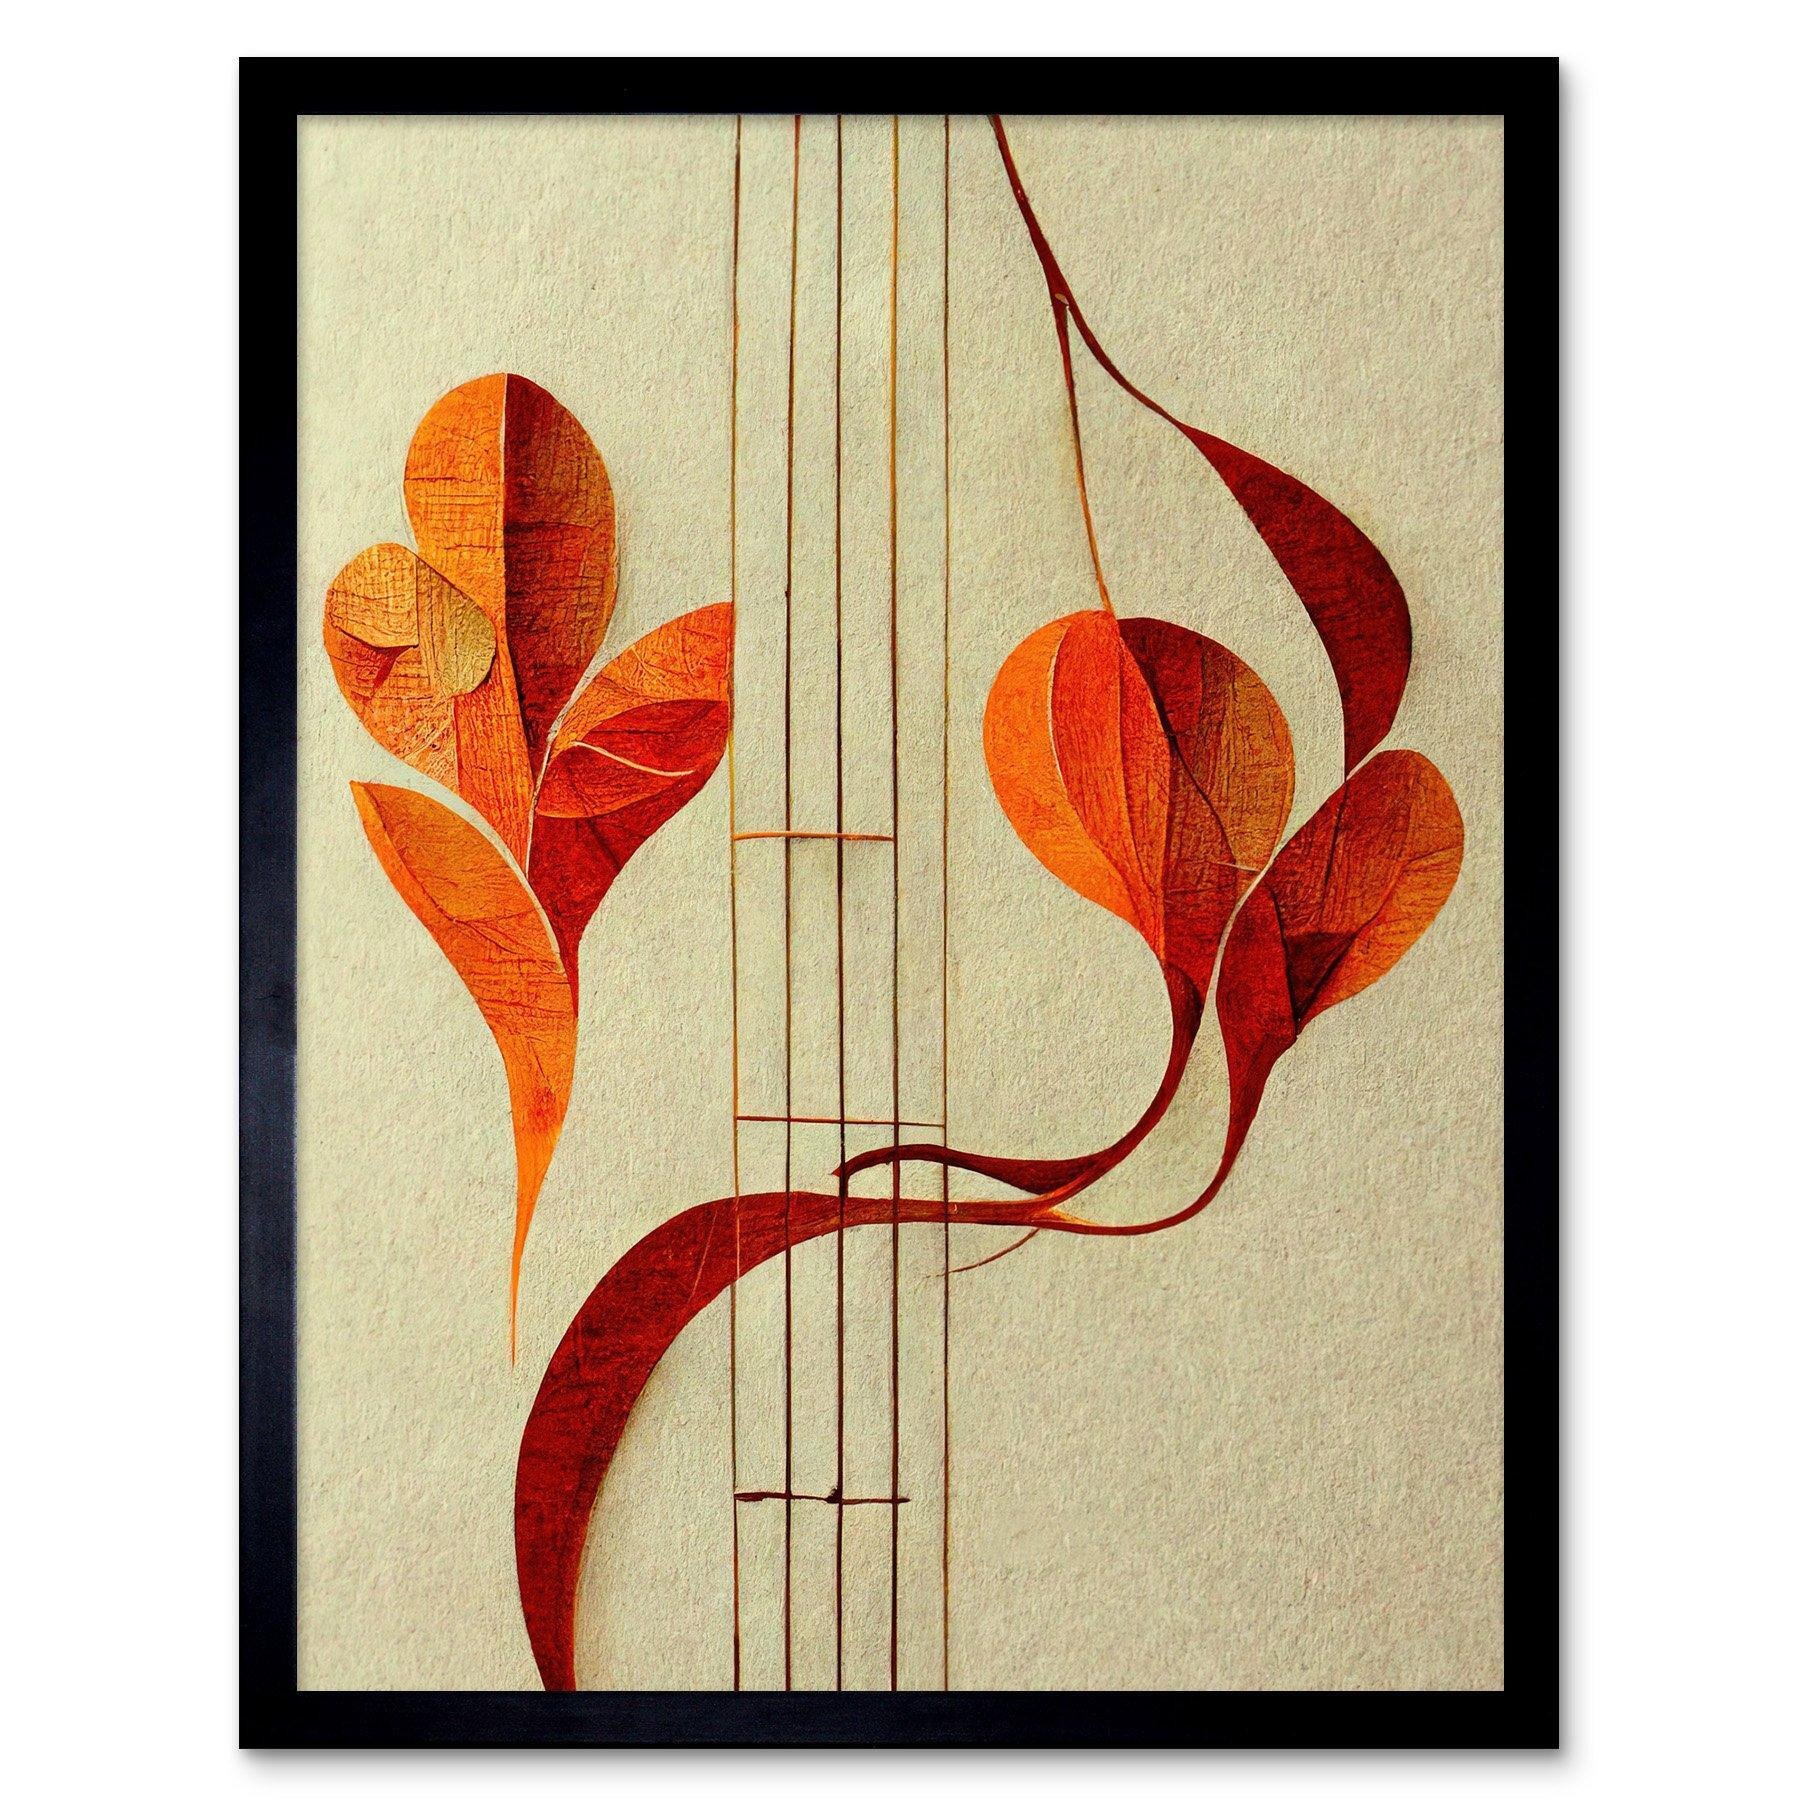 Wall Art Print Modern Abstract Orange Autumn Leaf and Musical Notes Music Staff Lines Art Framed - image 1